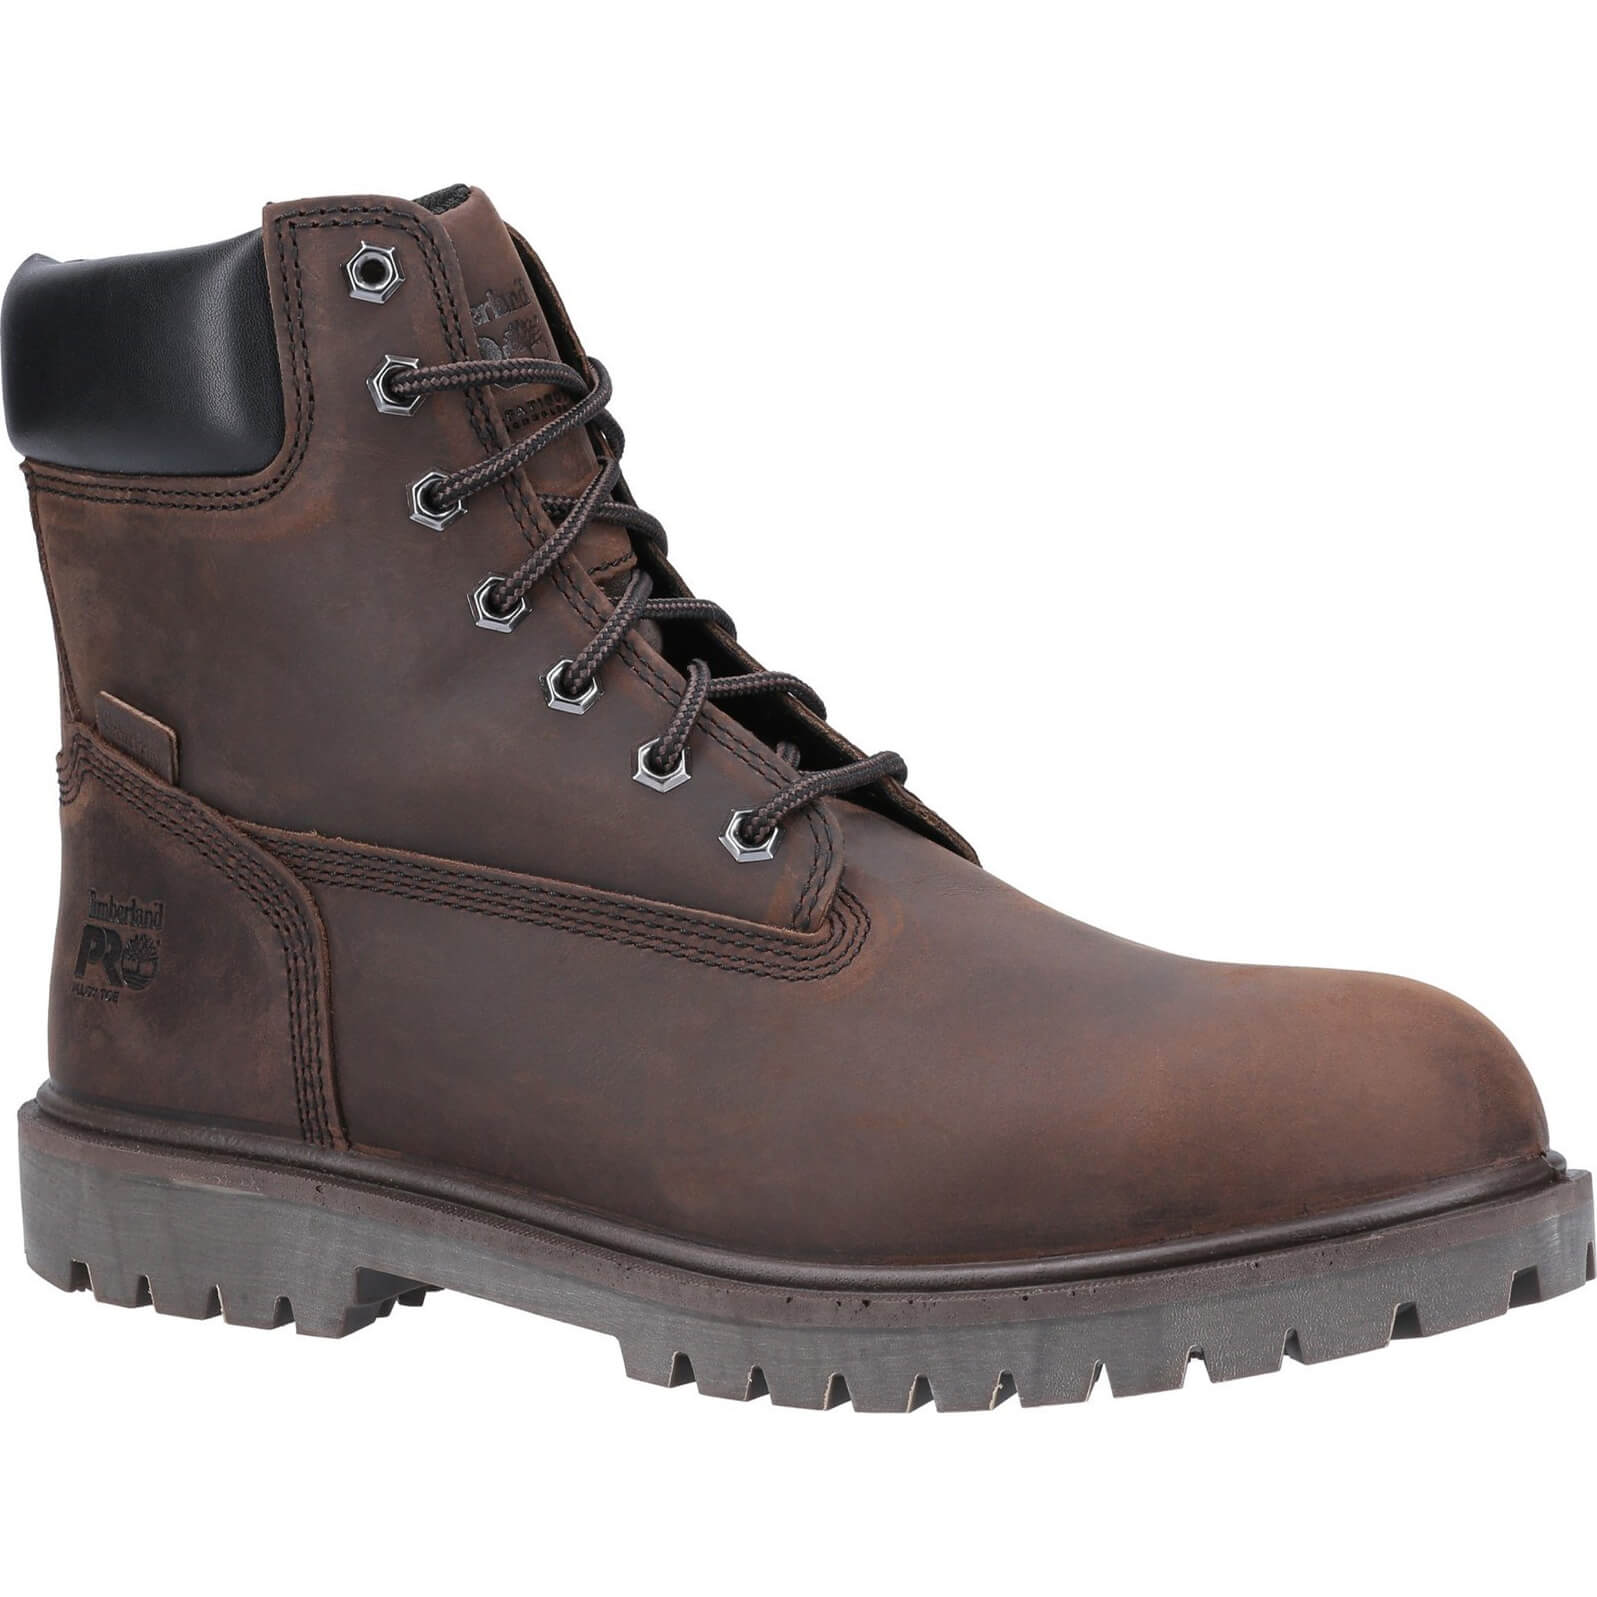 Image of Timberland Pro Iconic Safety Toe Work Boot Brown Size 6